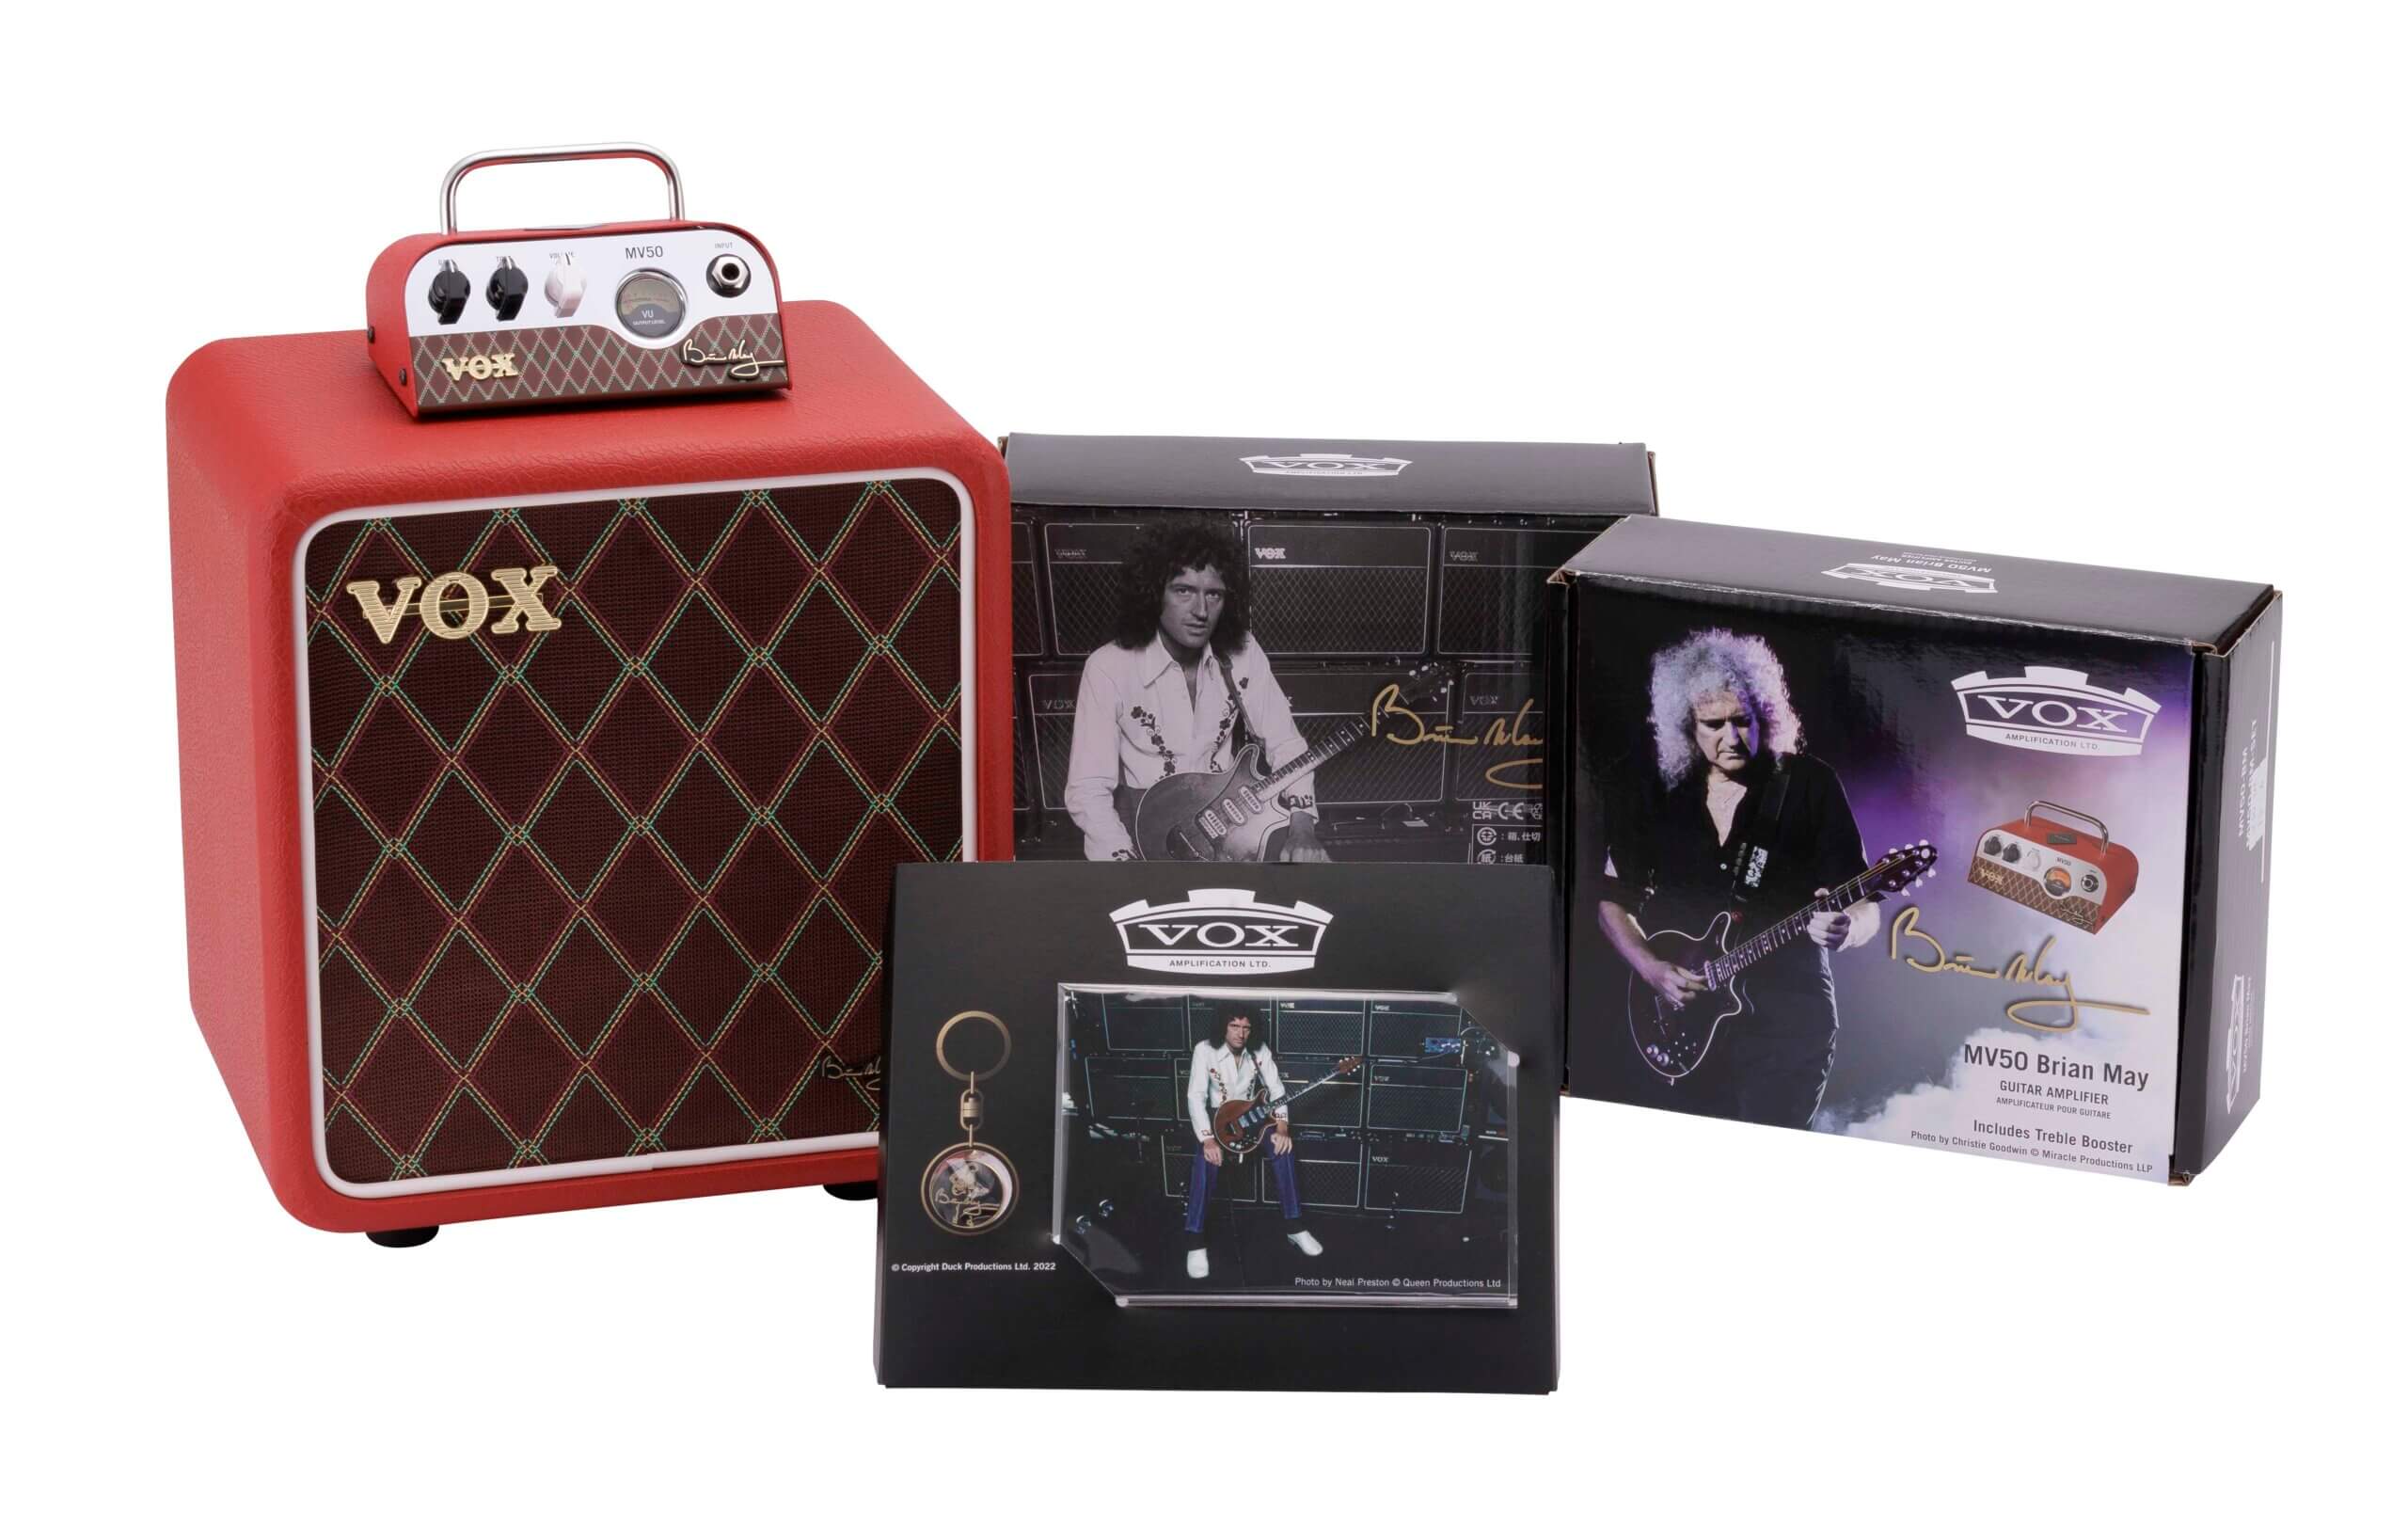 mv50 set brian may amp and cabinet featured image